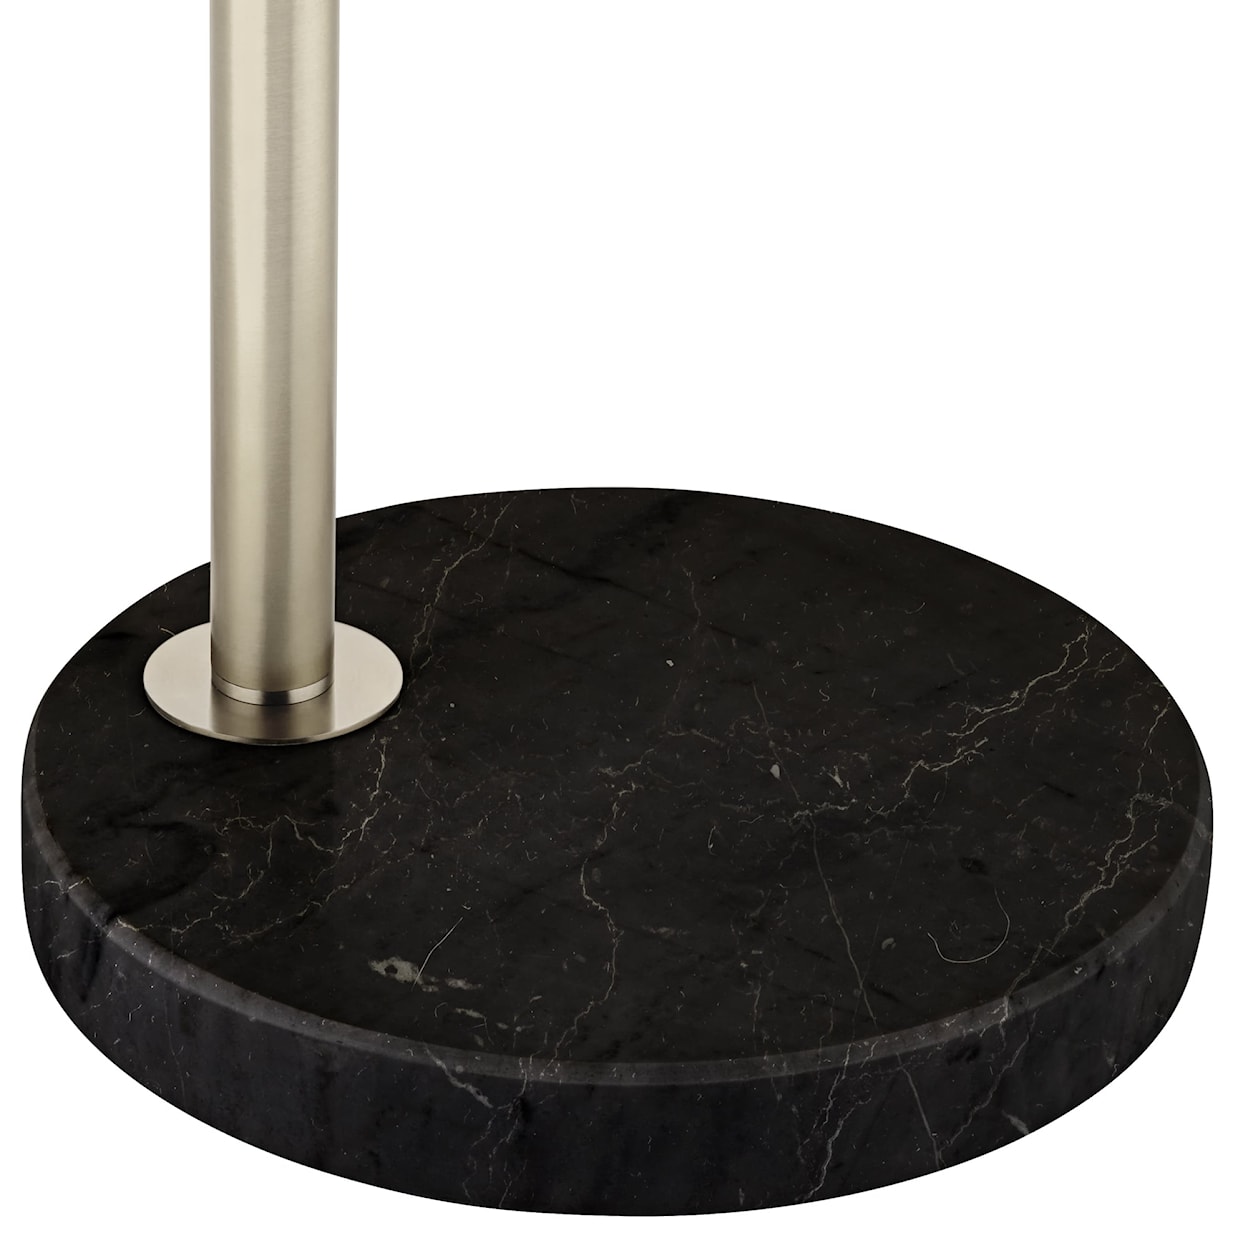 Pacific Coast Lighting Pacific Coast Lighting Fl-Arc B Nickel With Marble Base